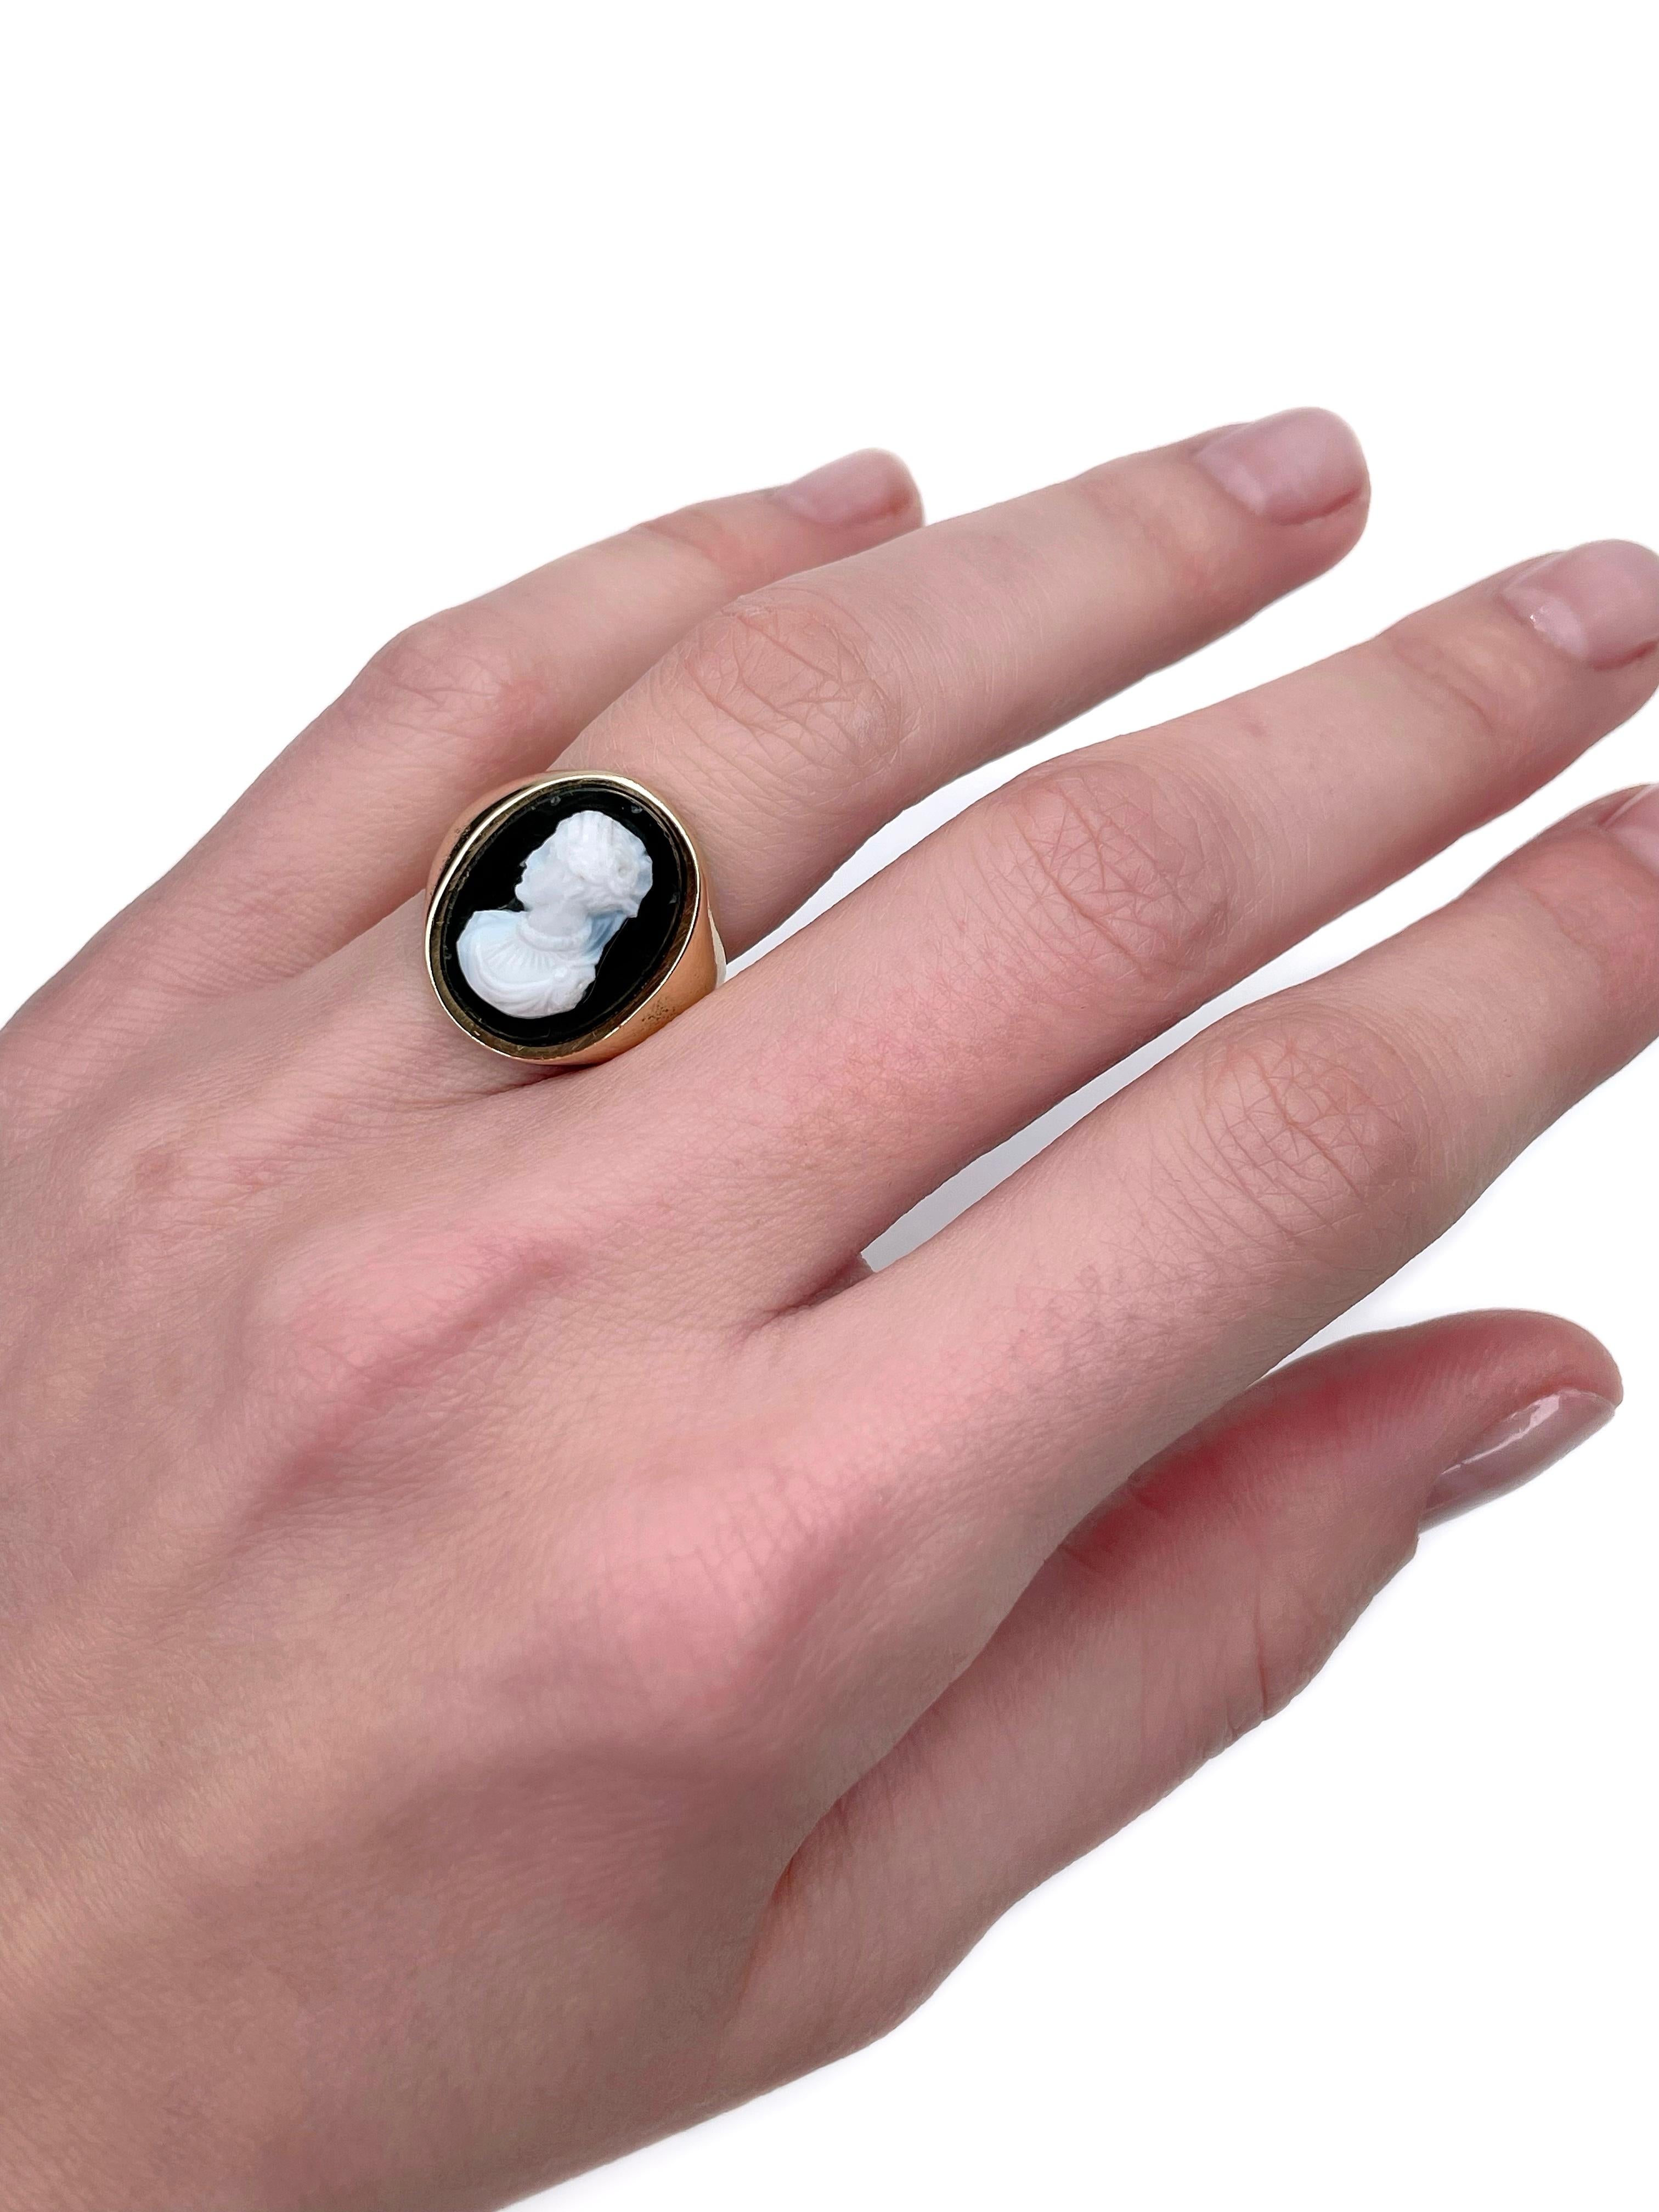 This is a vintage cocktail ring crafted in 18K gold. Circa 1960. 

It features an onyx cameo depicting a lady facing left. This is rare and valuable, because the majority of cameos face right.  

Weight: 8.87g
Size: 15.75 (US 5.25)

IMPORTANT: